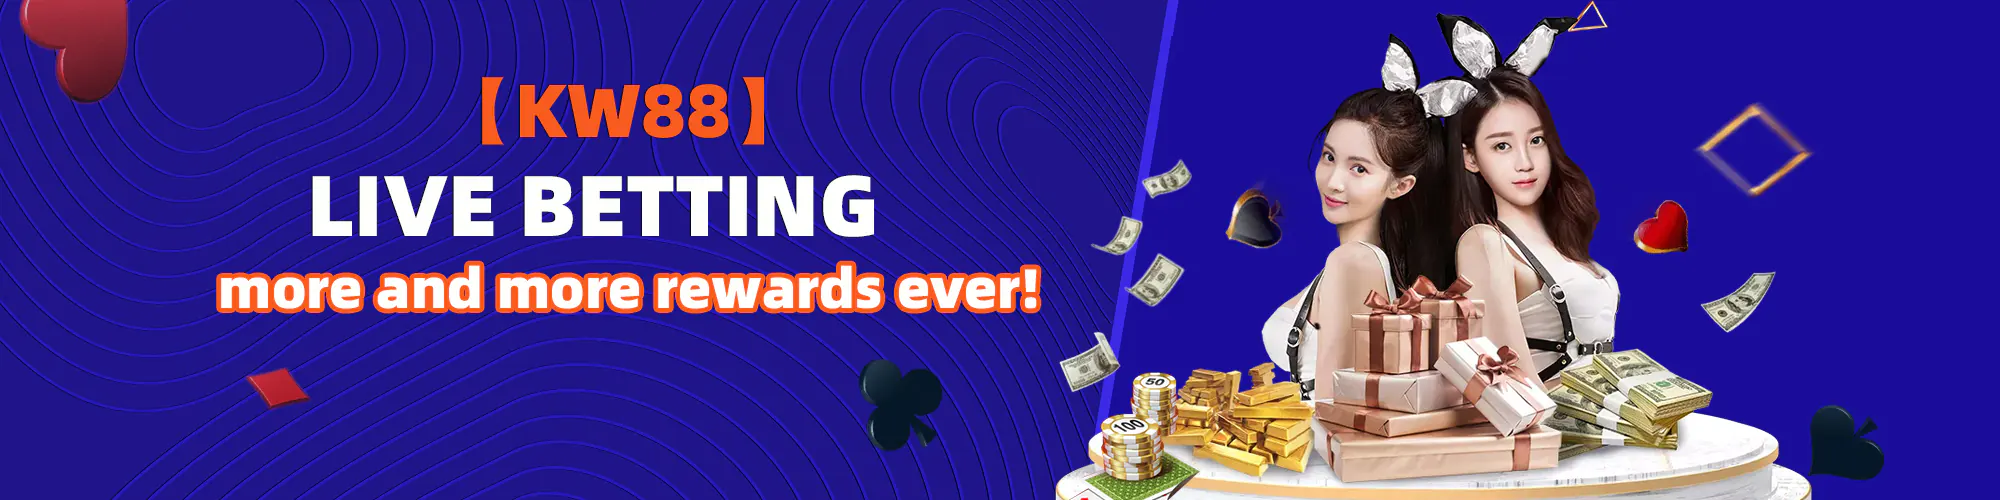 Live betting, more and more rewards ever!